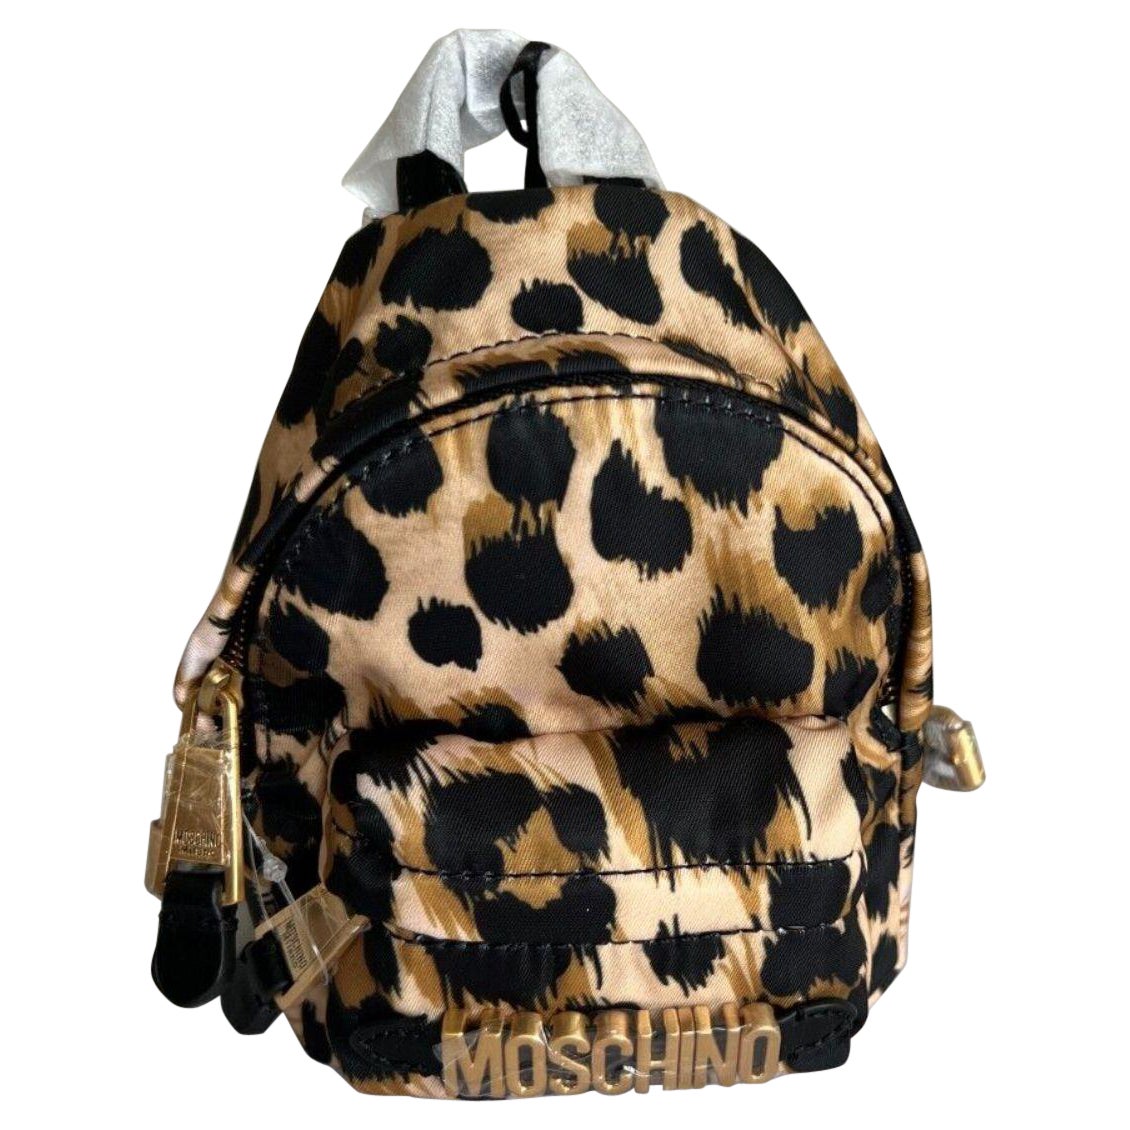 AW21 Moschino Couture Leopard Print Shoulder Bag Mini Backpack by Jeremy Scott